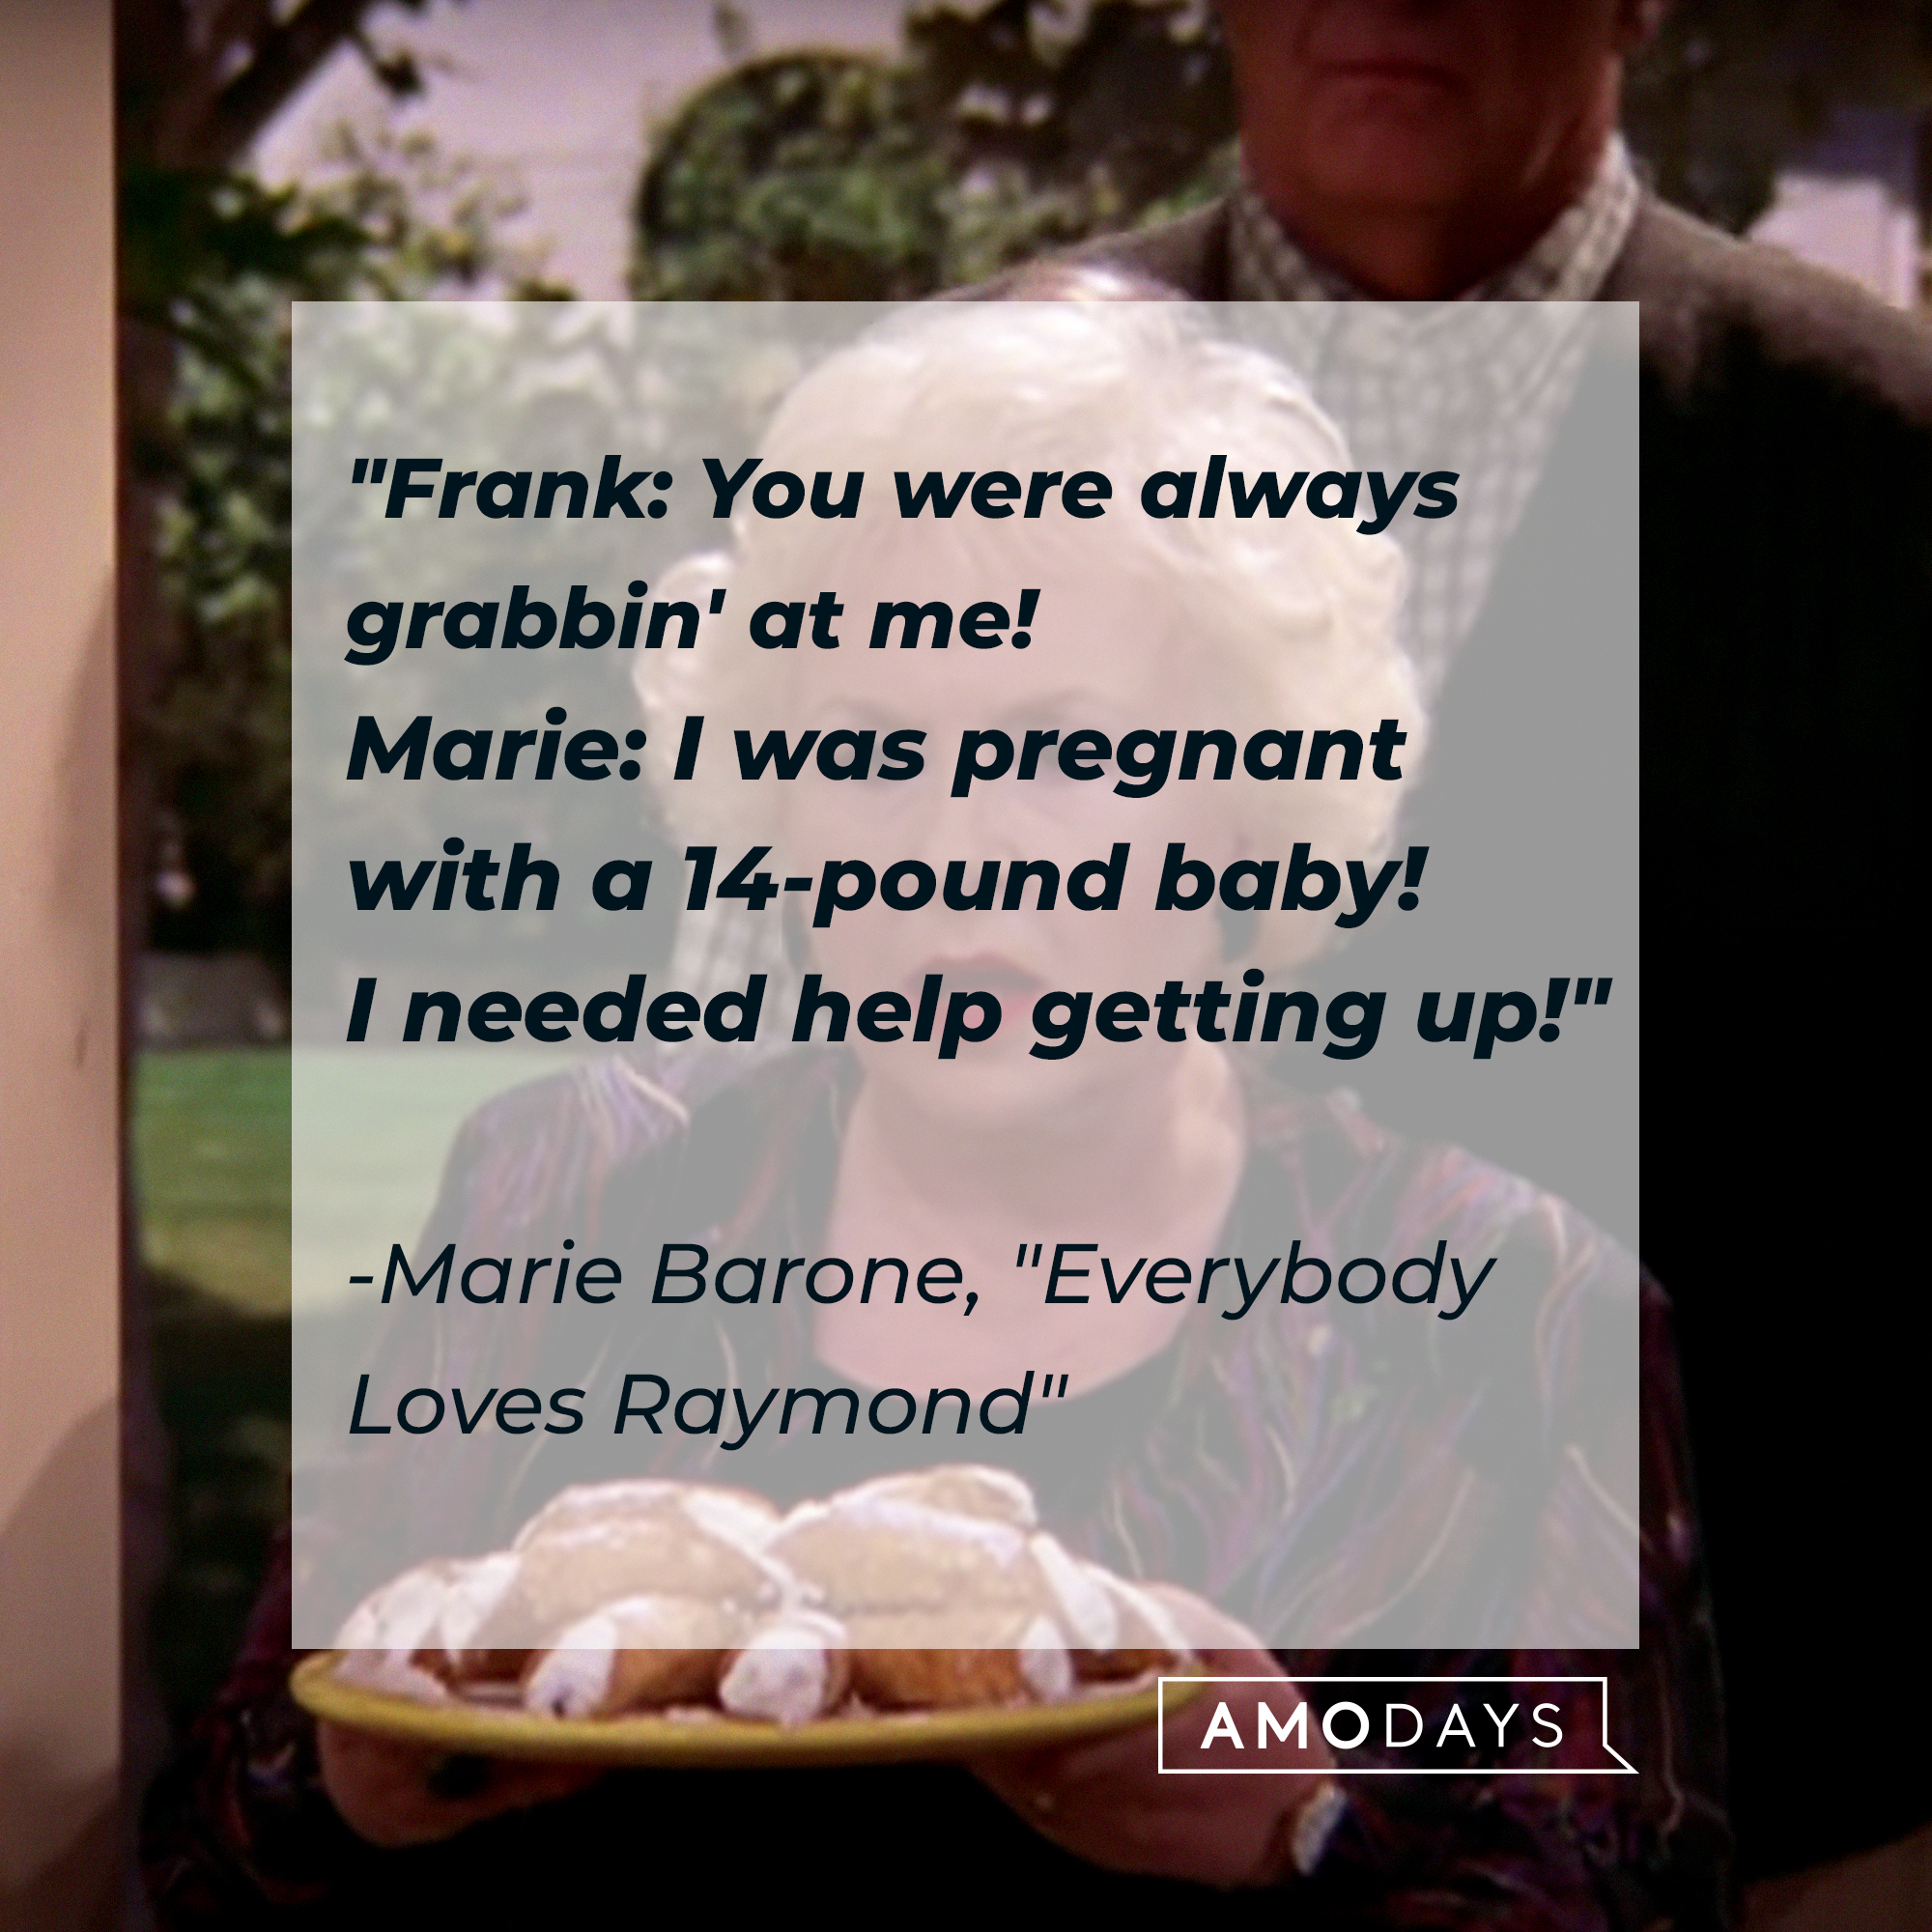 "Everybody Loves Raymond" quote, "Frank: You were always grabbin' at me! Marie: I was pregnant with a 14-pound baby! I needed help getting up!" | Source: Facebook/EverybodyLovesRaymondTVShow